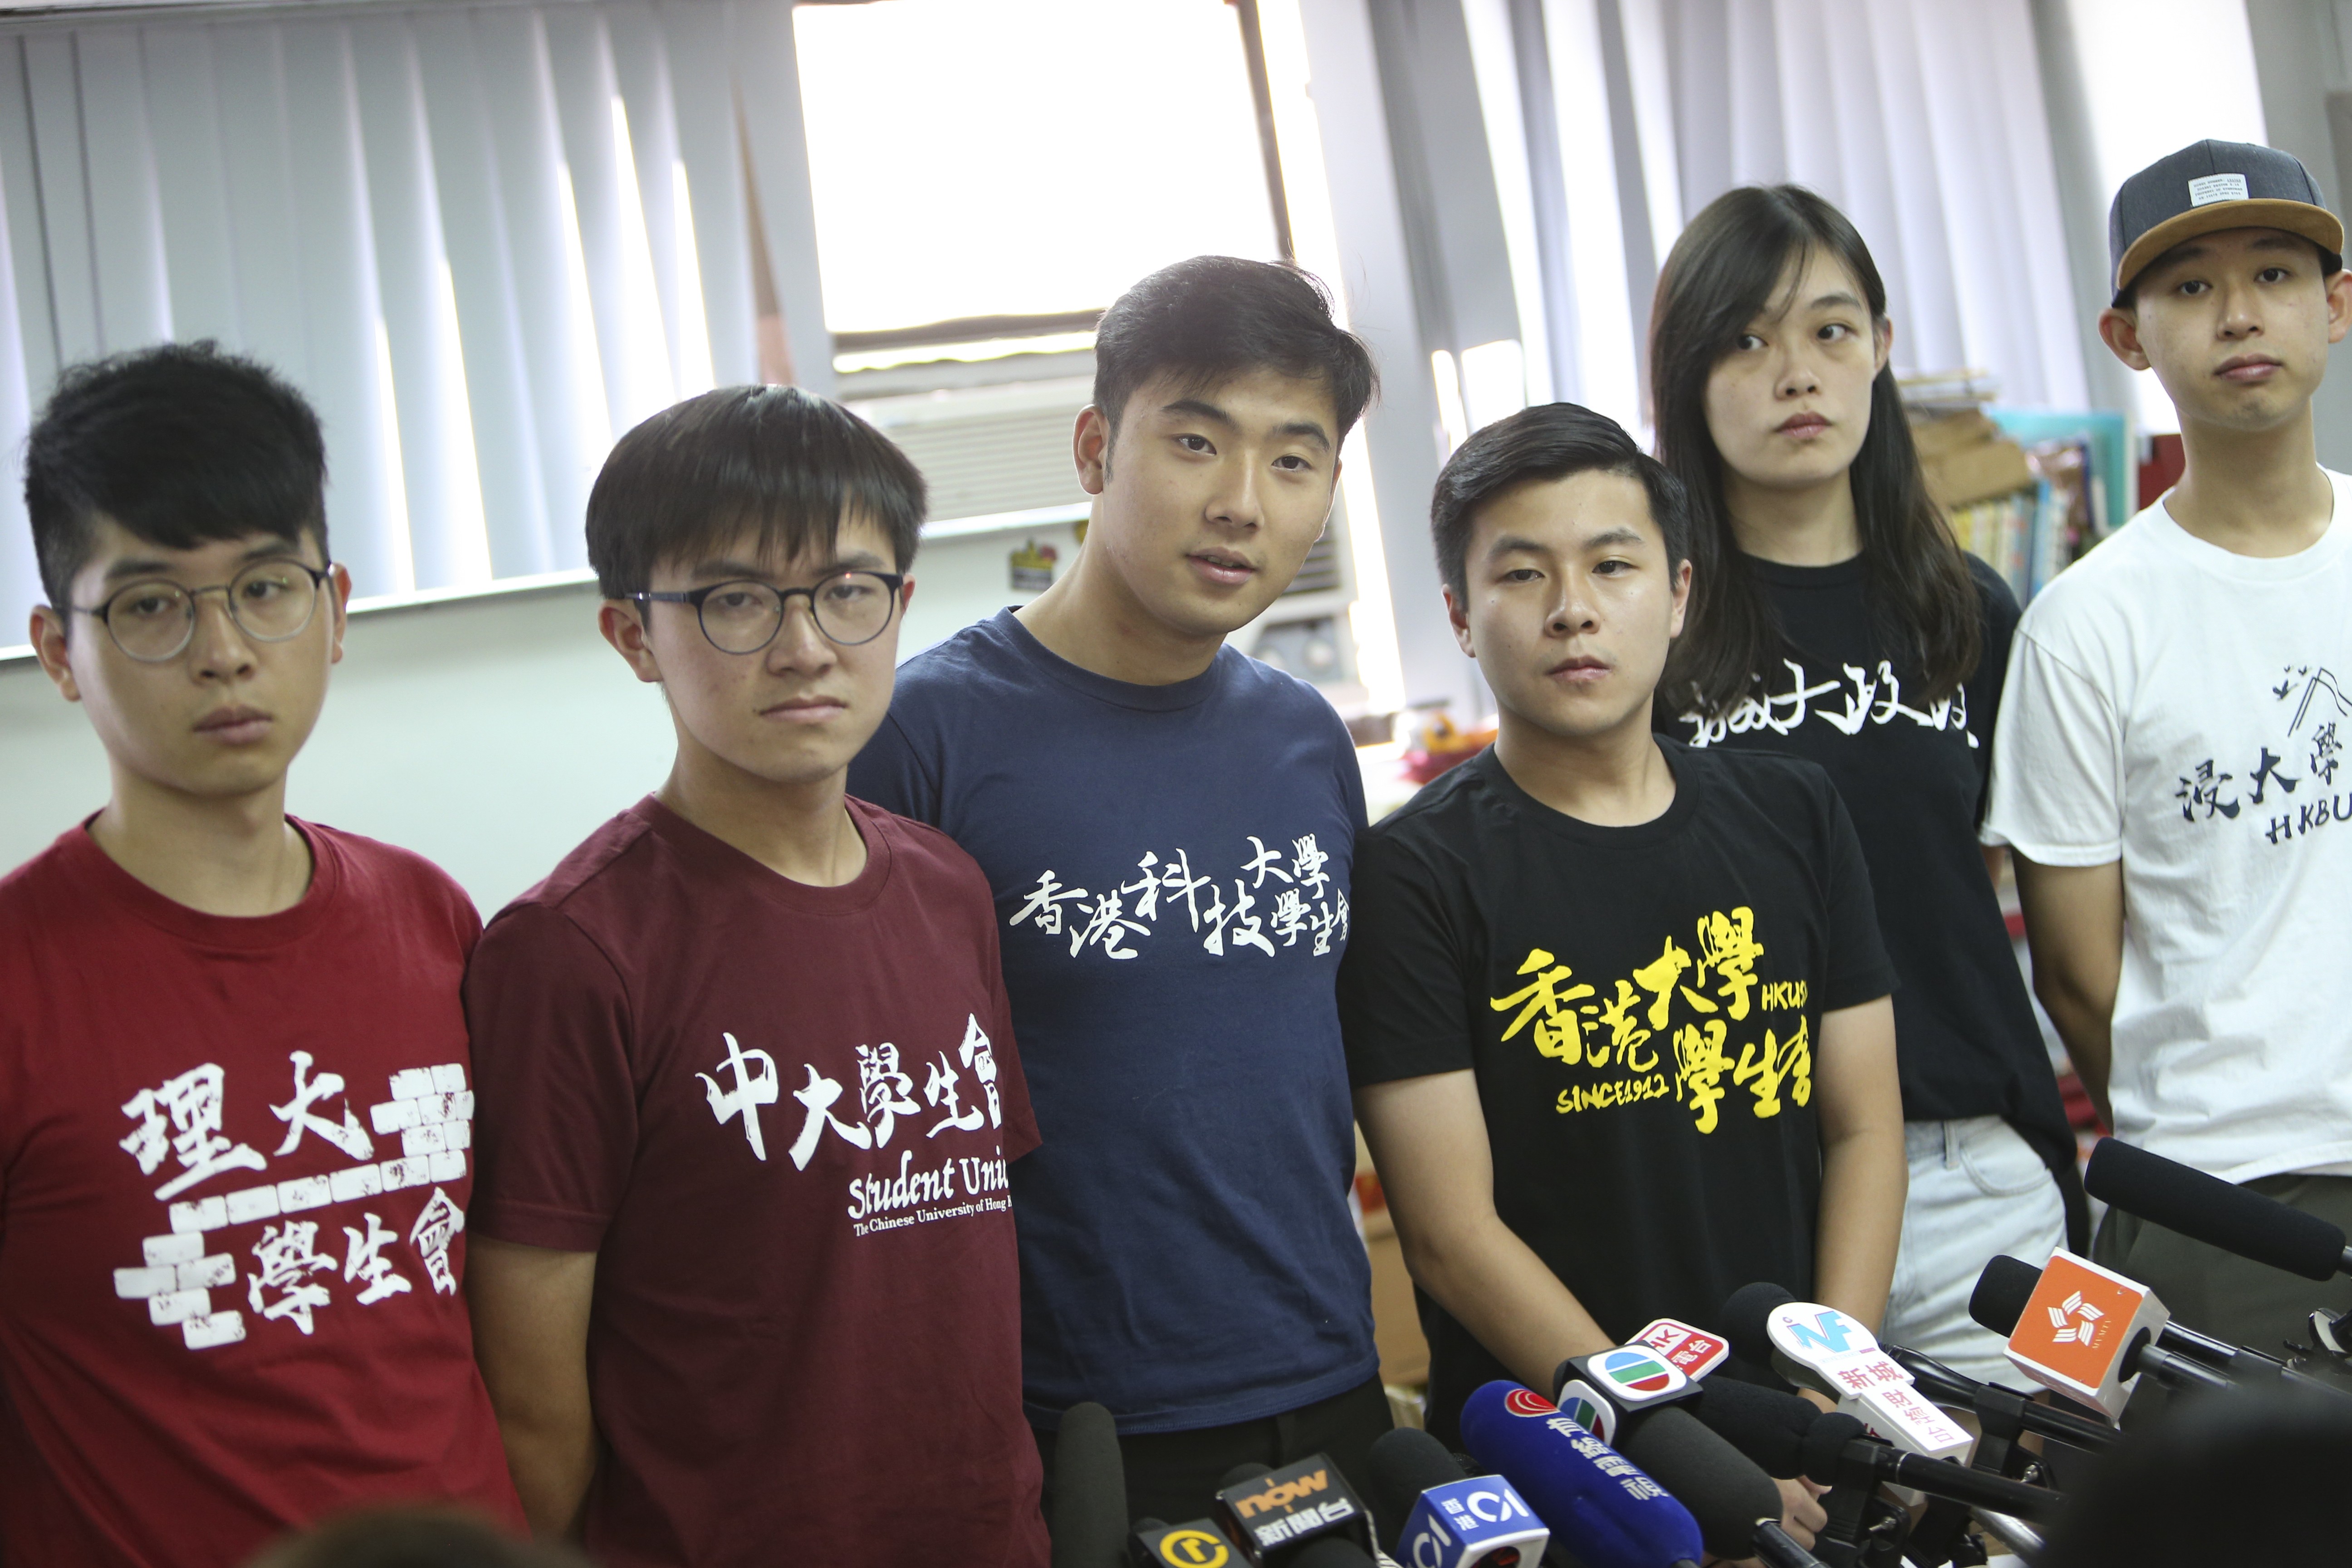 Student Union leaders at a Hong Kong Federation of Students press conference on Friday. Photo: Winson Wong